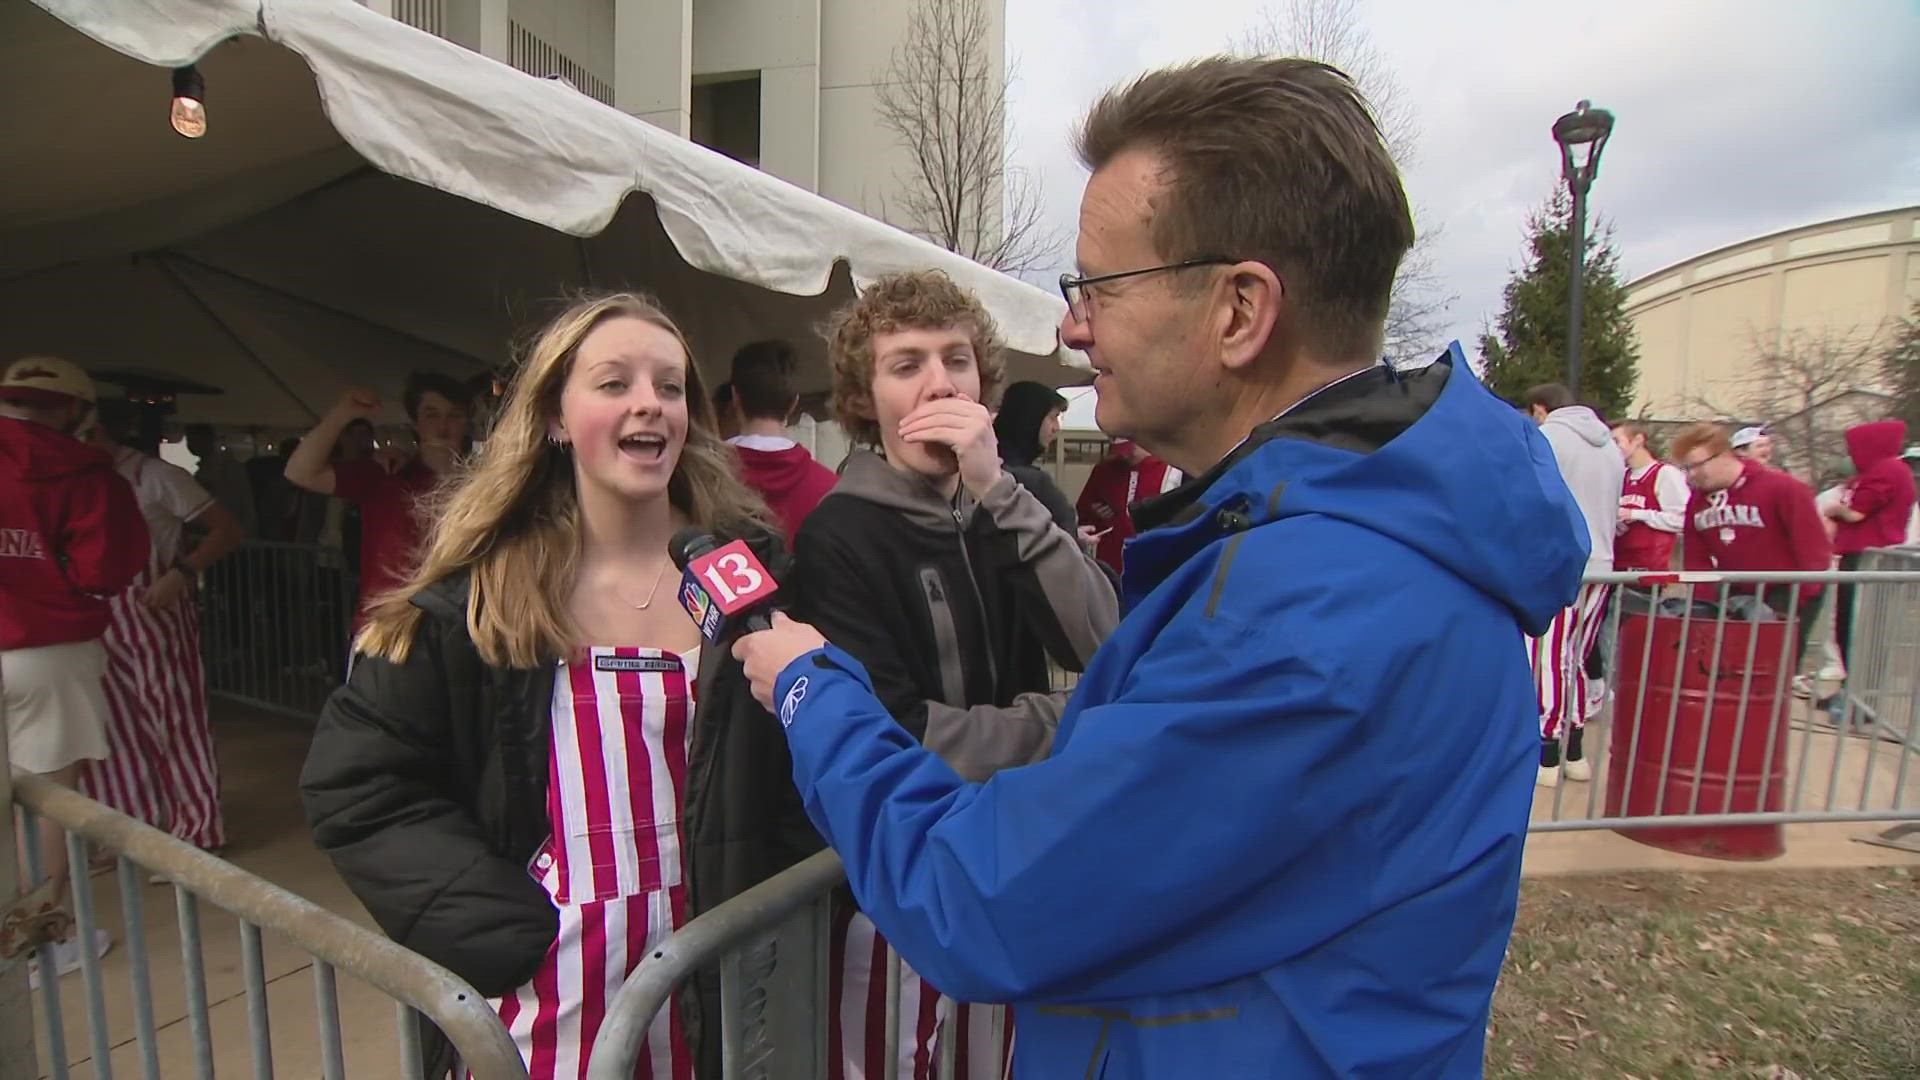 IU fans shared their good news with Dave Calabro this week.